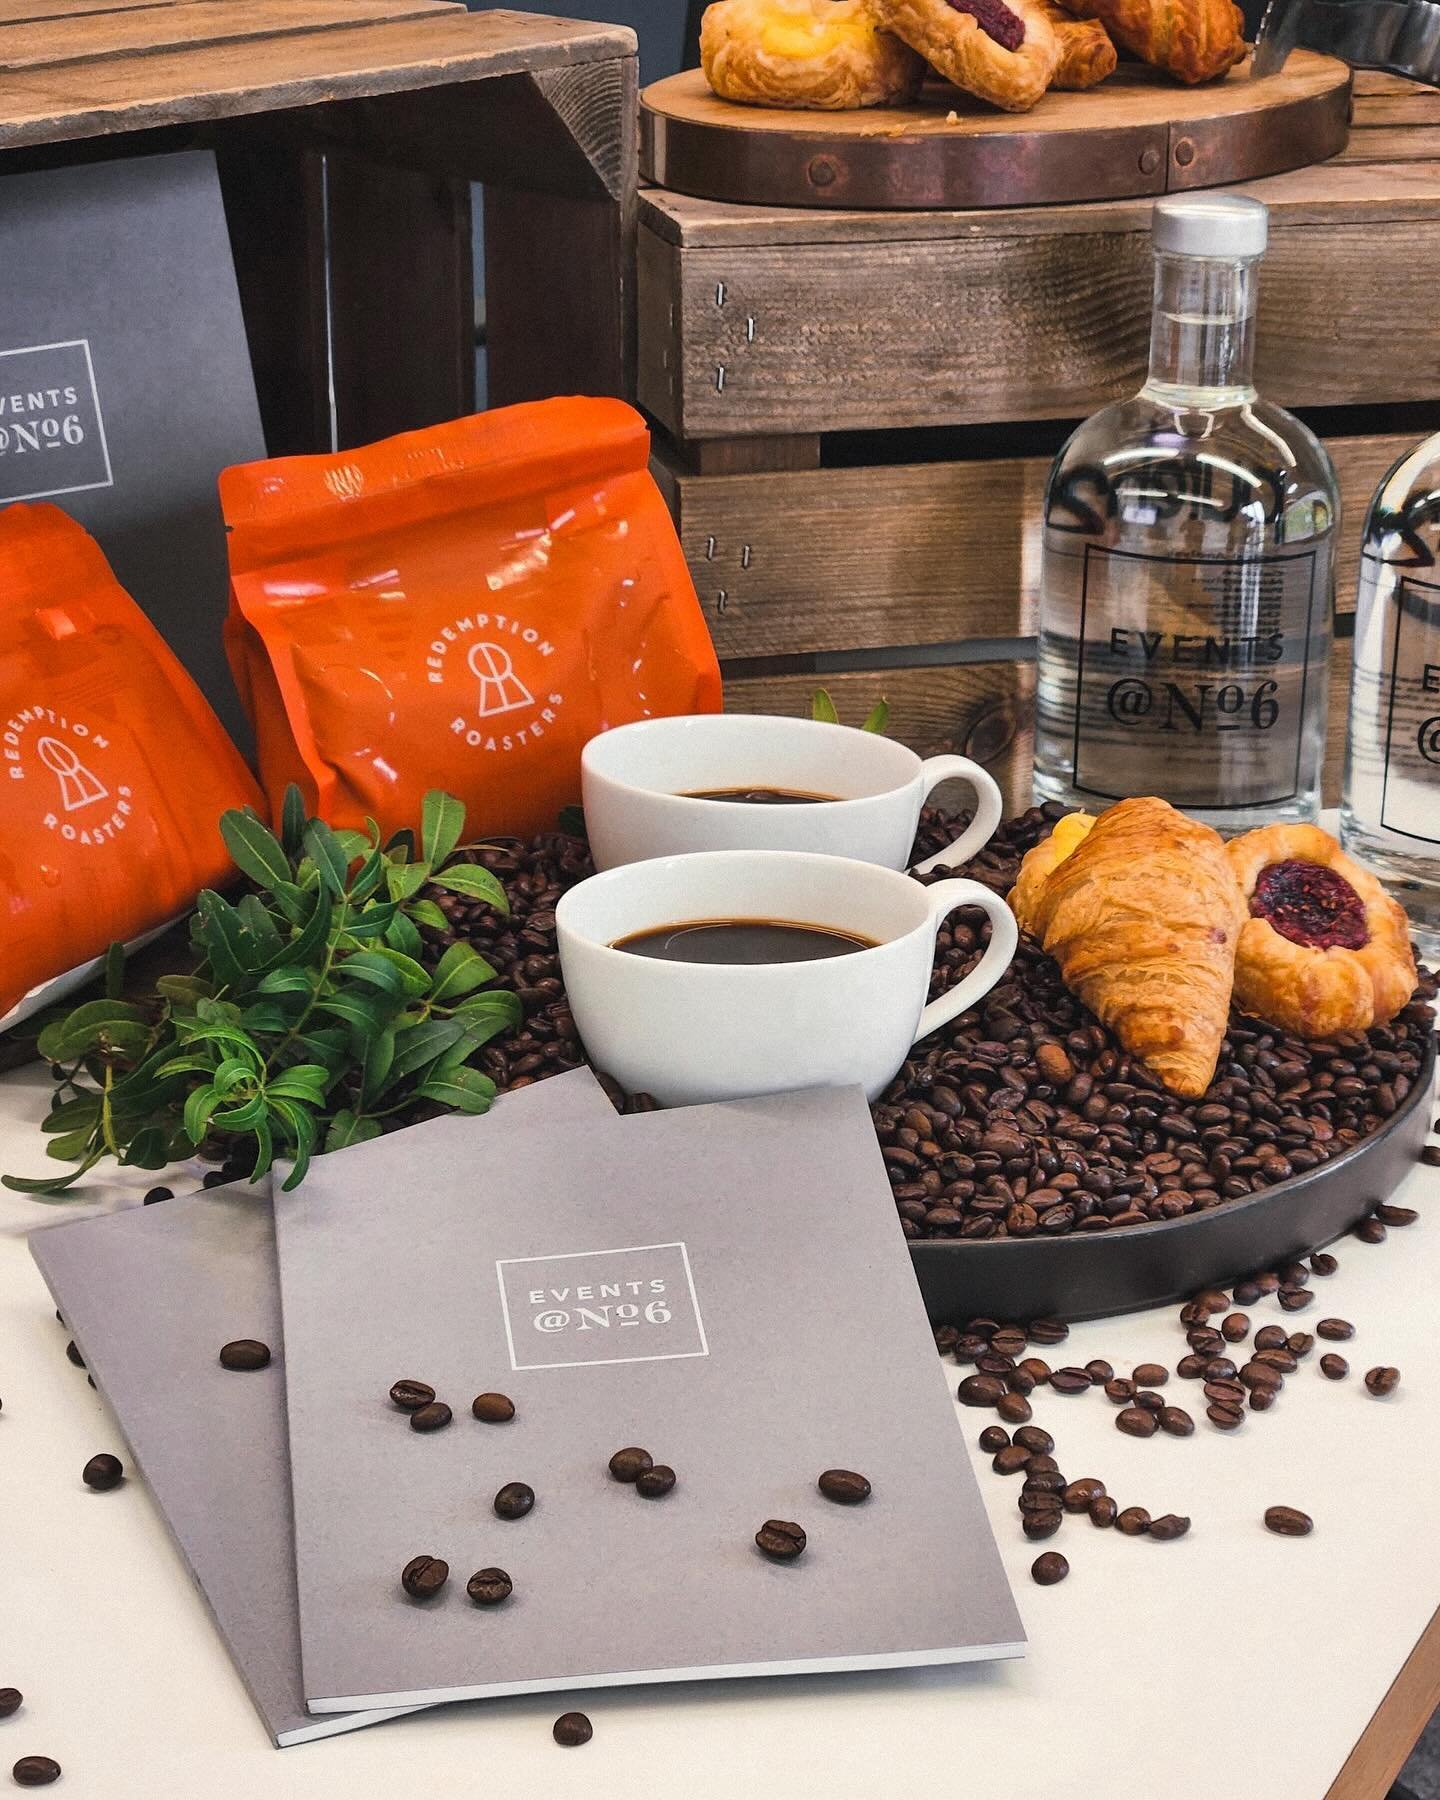 Brewing hope, one cup at a time. Introducing Redemption Roaster coffee - where every sip supports the journey of transformation and second chances.

Now proudly served at Events@No6, adding community impact to your conferences and meeting. Read more 